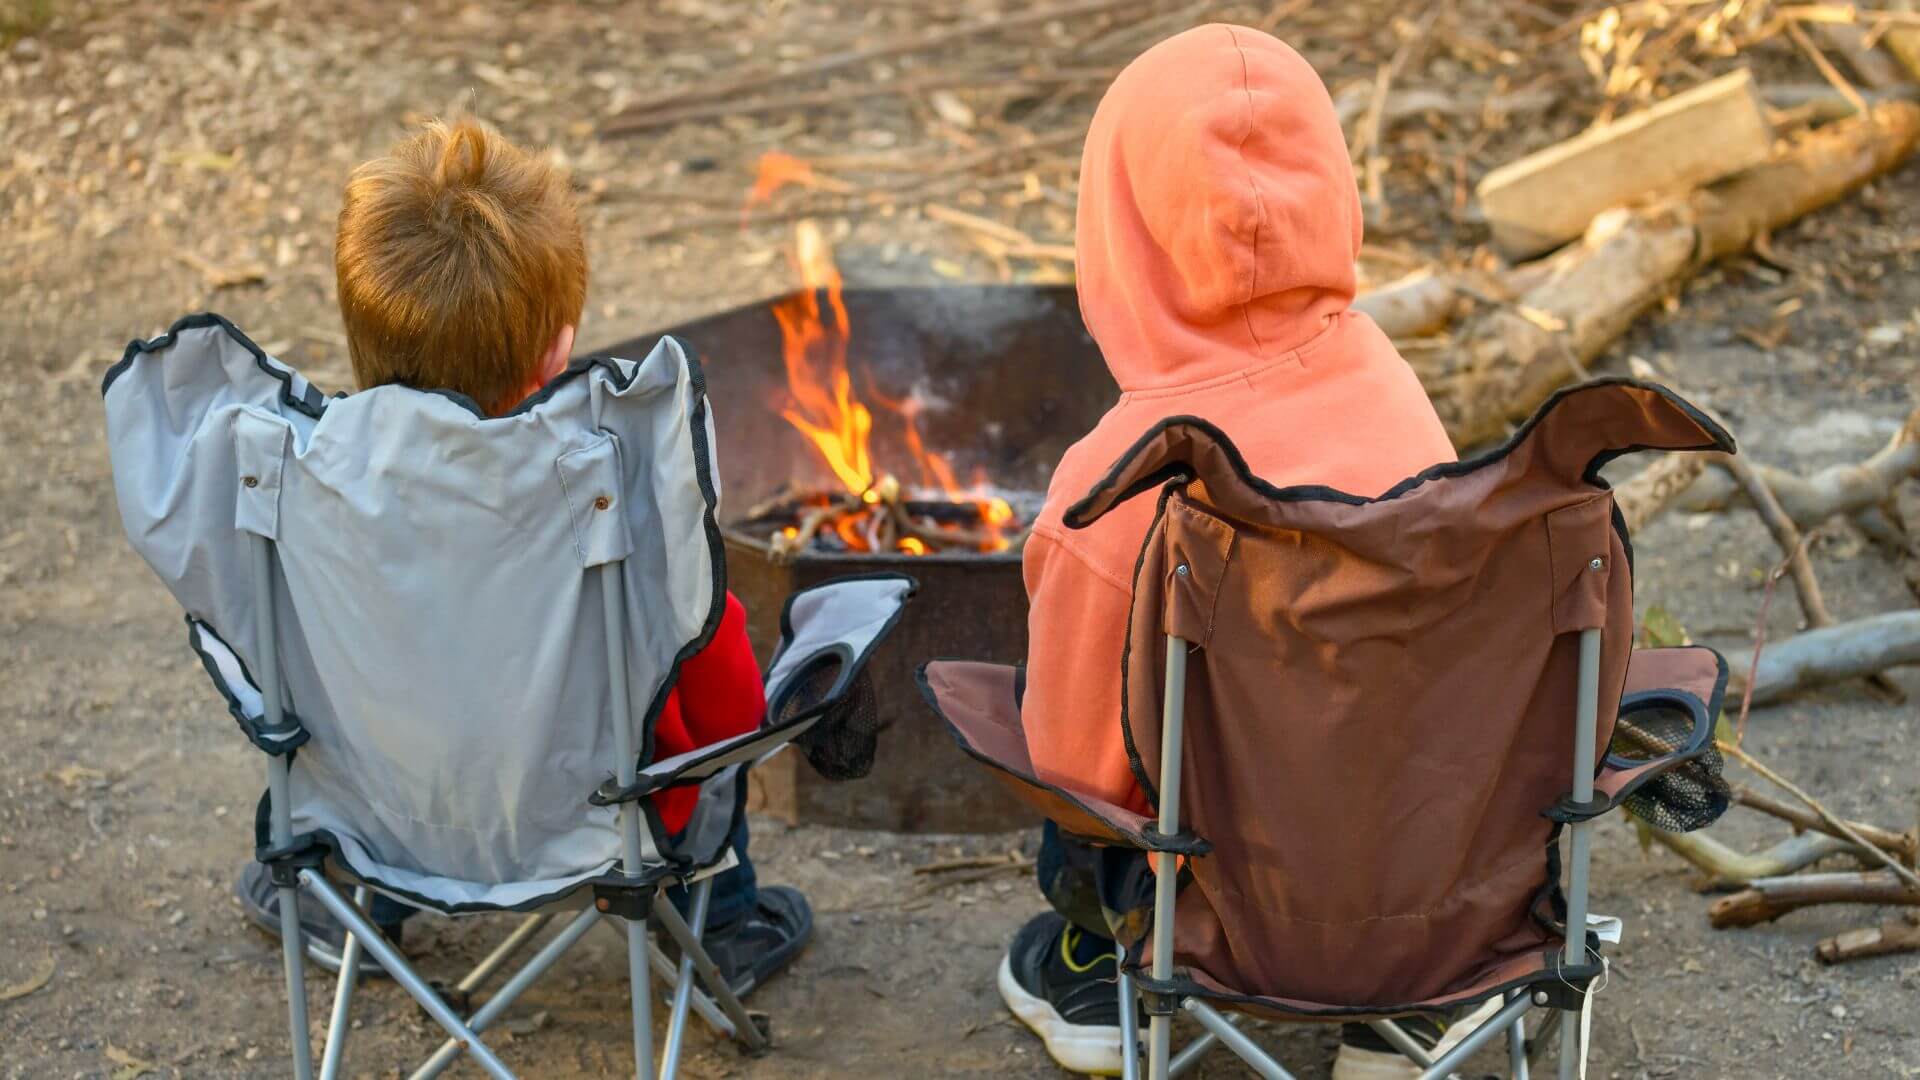 How To Plan a Fun and Stress-Free Camping Trip with Kids